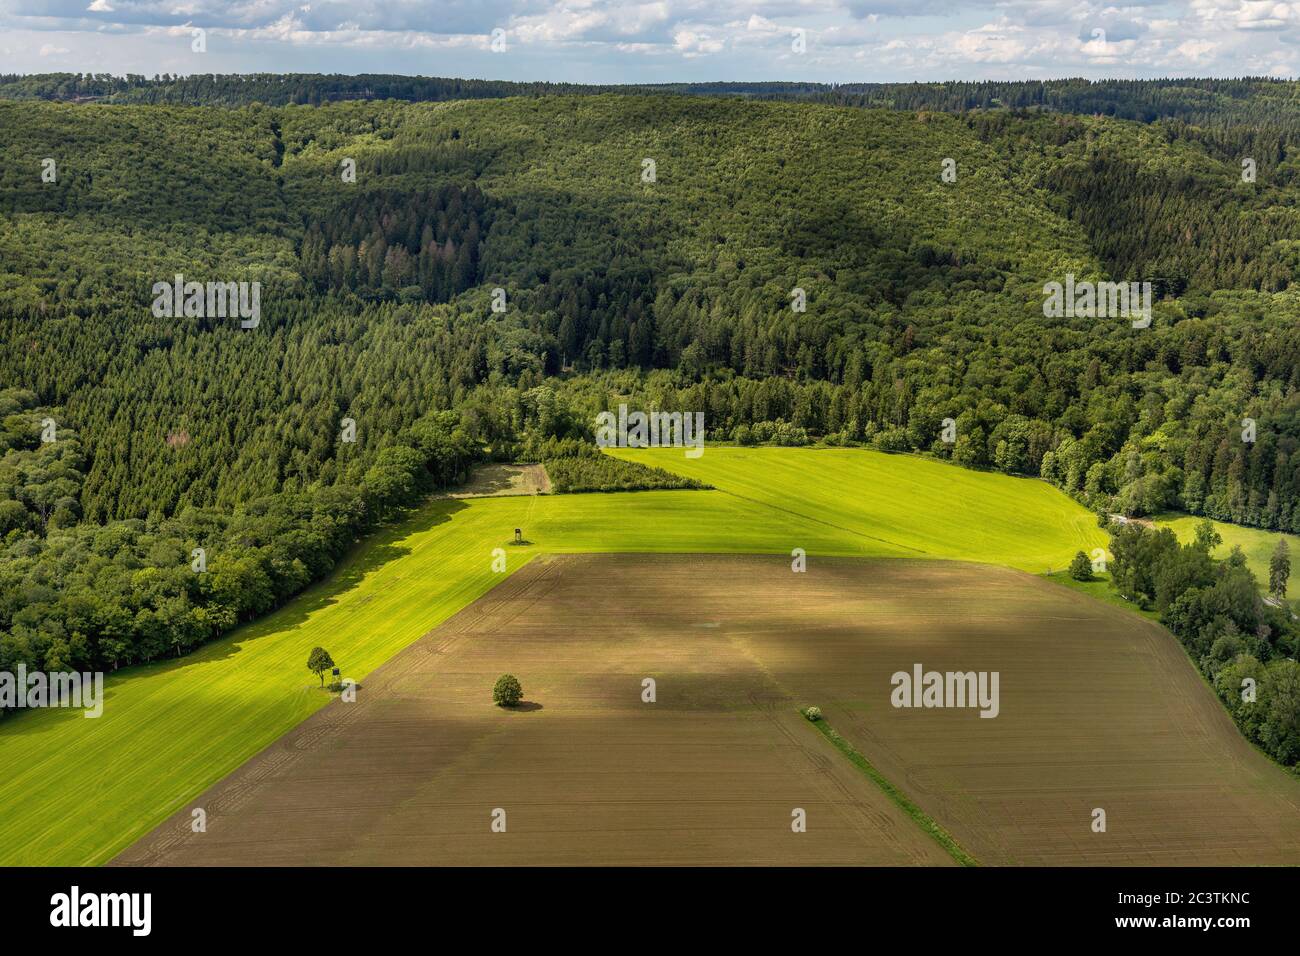 fields and meadows with hunting stand at Arnsberger Wald North of Enste, 13.06.2019, Luftbild, Germany, North Rhine-Westphalia, Sauerland, Meschede Stock Photo